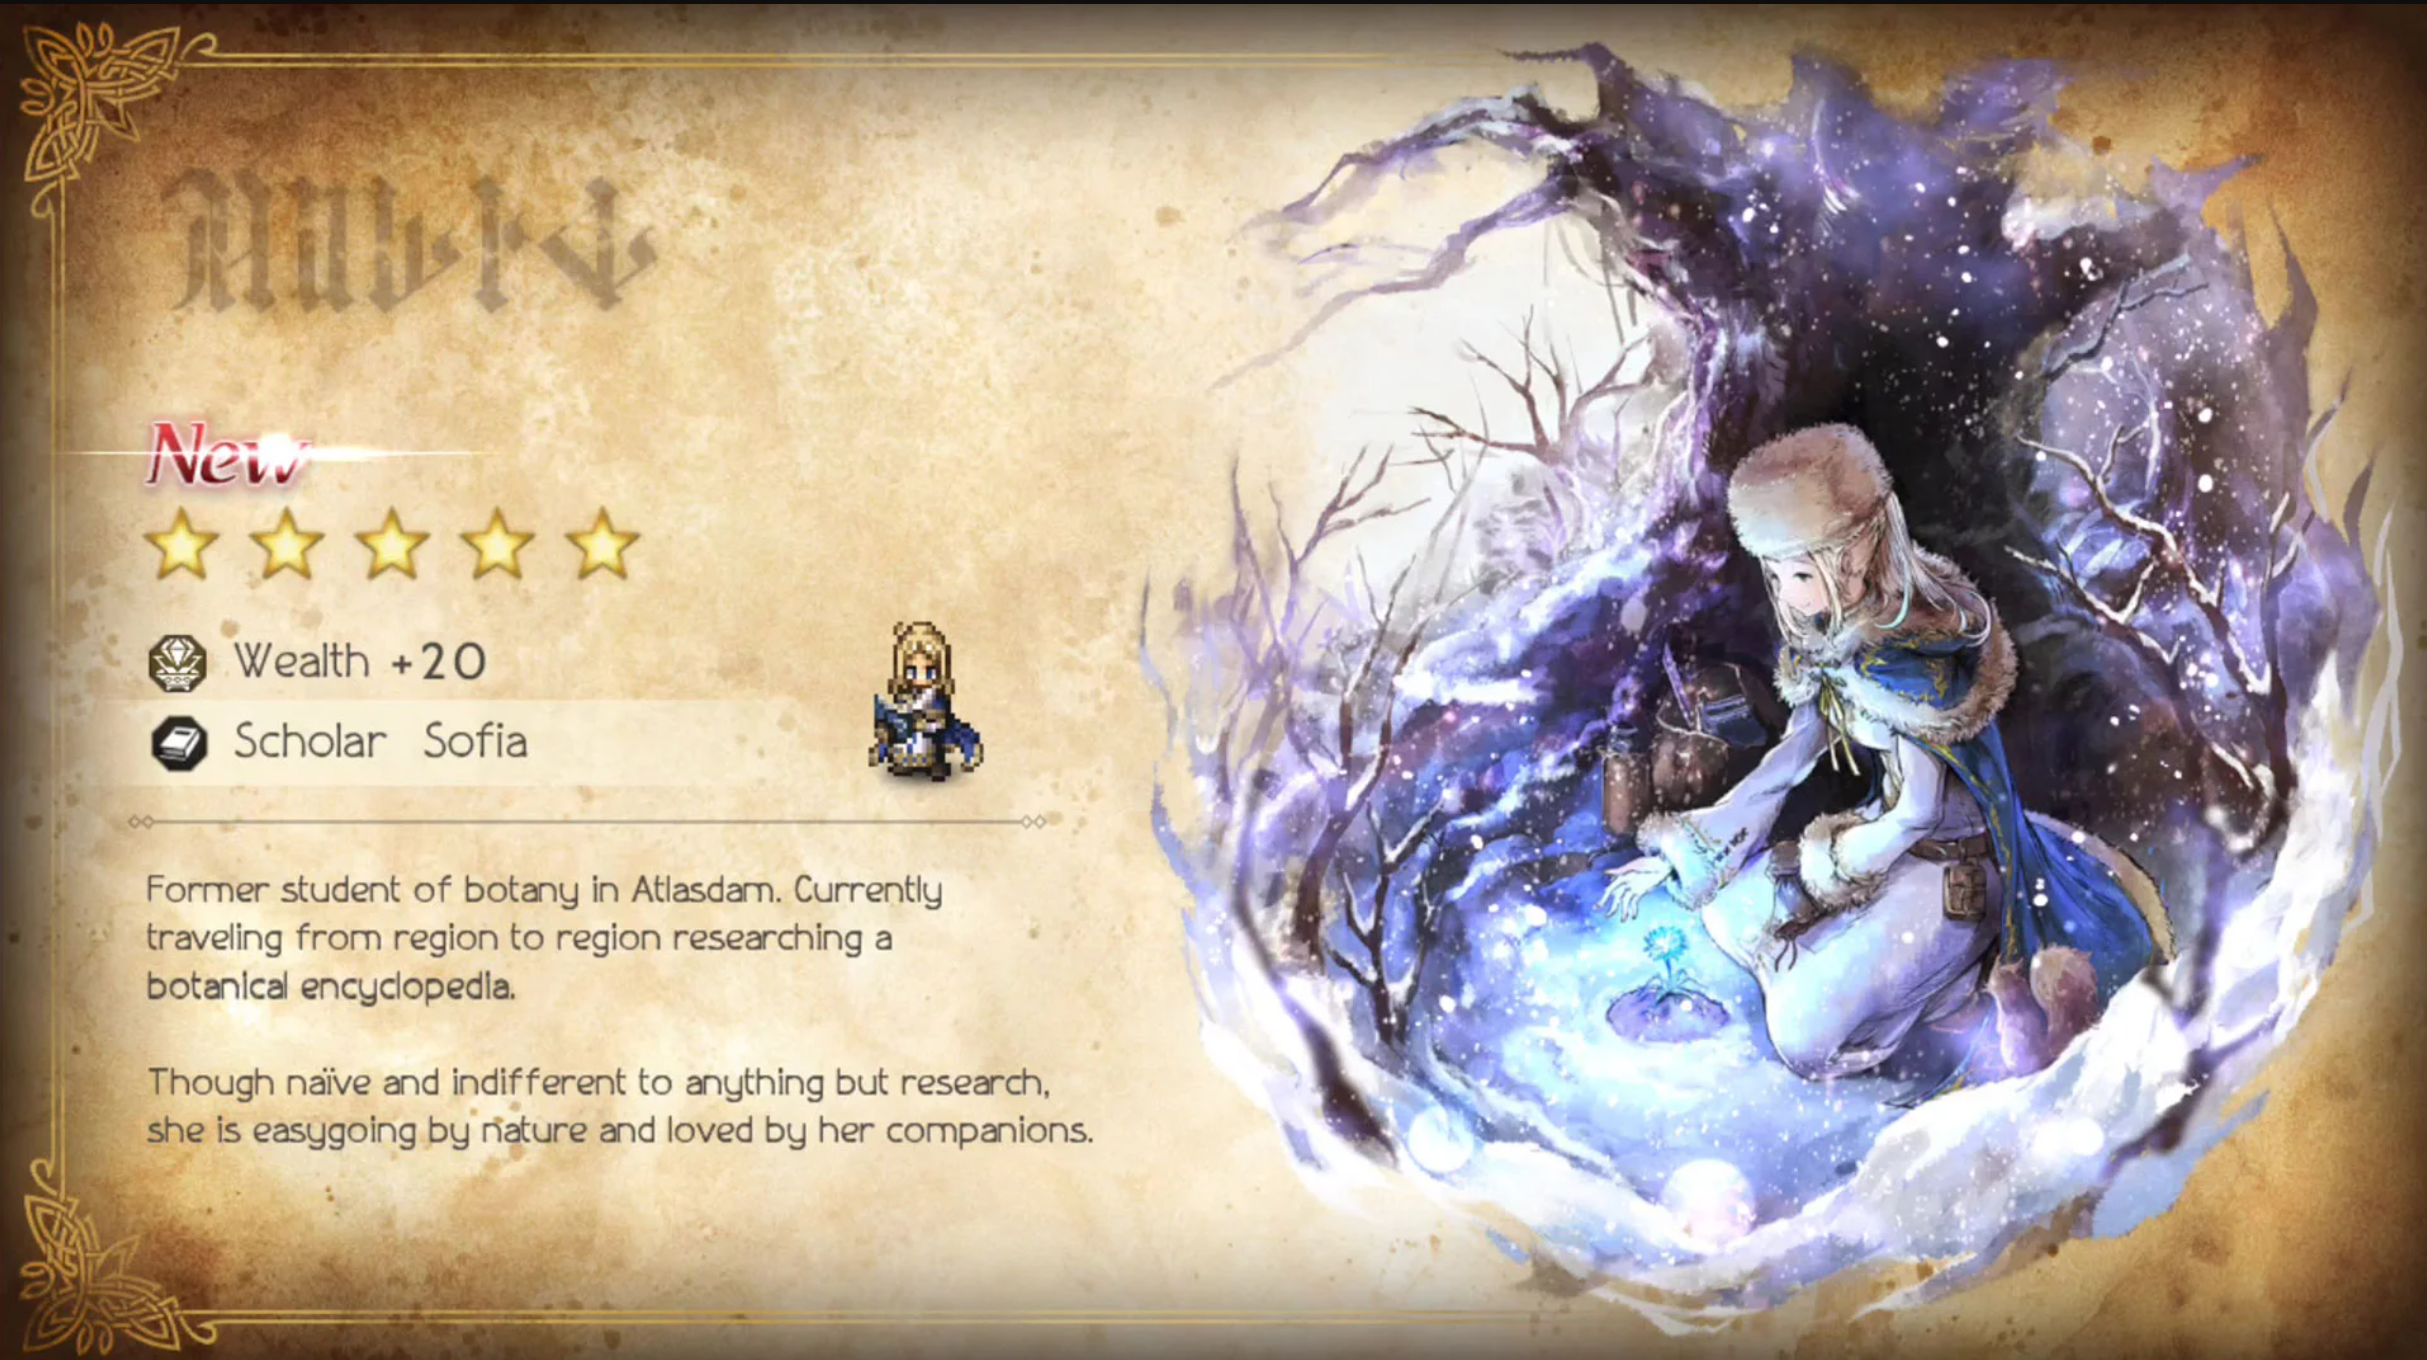 New Octopath Traveler project announced for iOS and Android